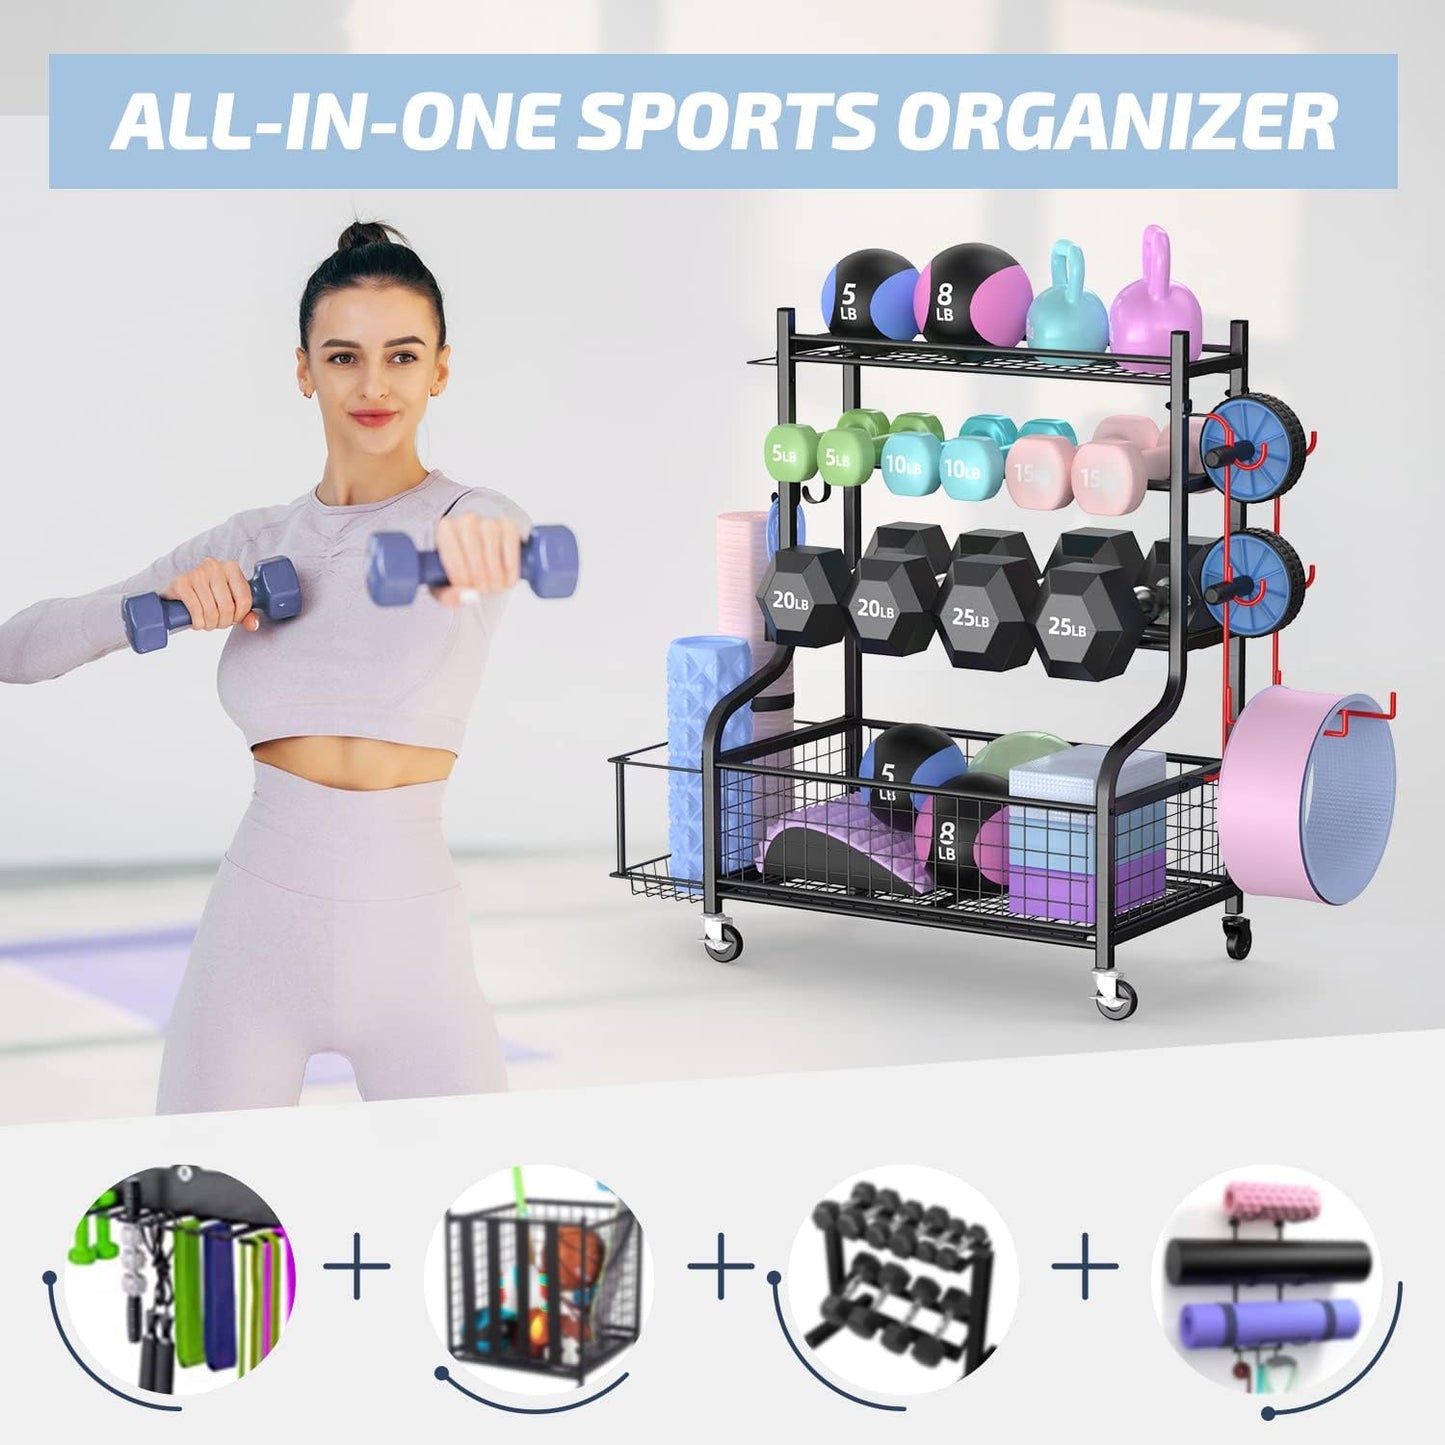 Dumbbell Rack, Weight Rack for Dumbbells, Home Gym Storage for Dumbbells Kettlebells Yoga Mat and Balls, All in One Workout Storage with Wheels and Hooks, Powder Coated Finish Steel